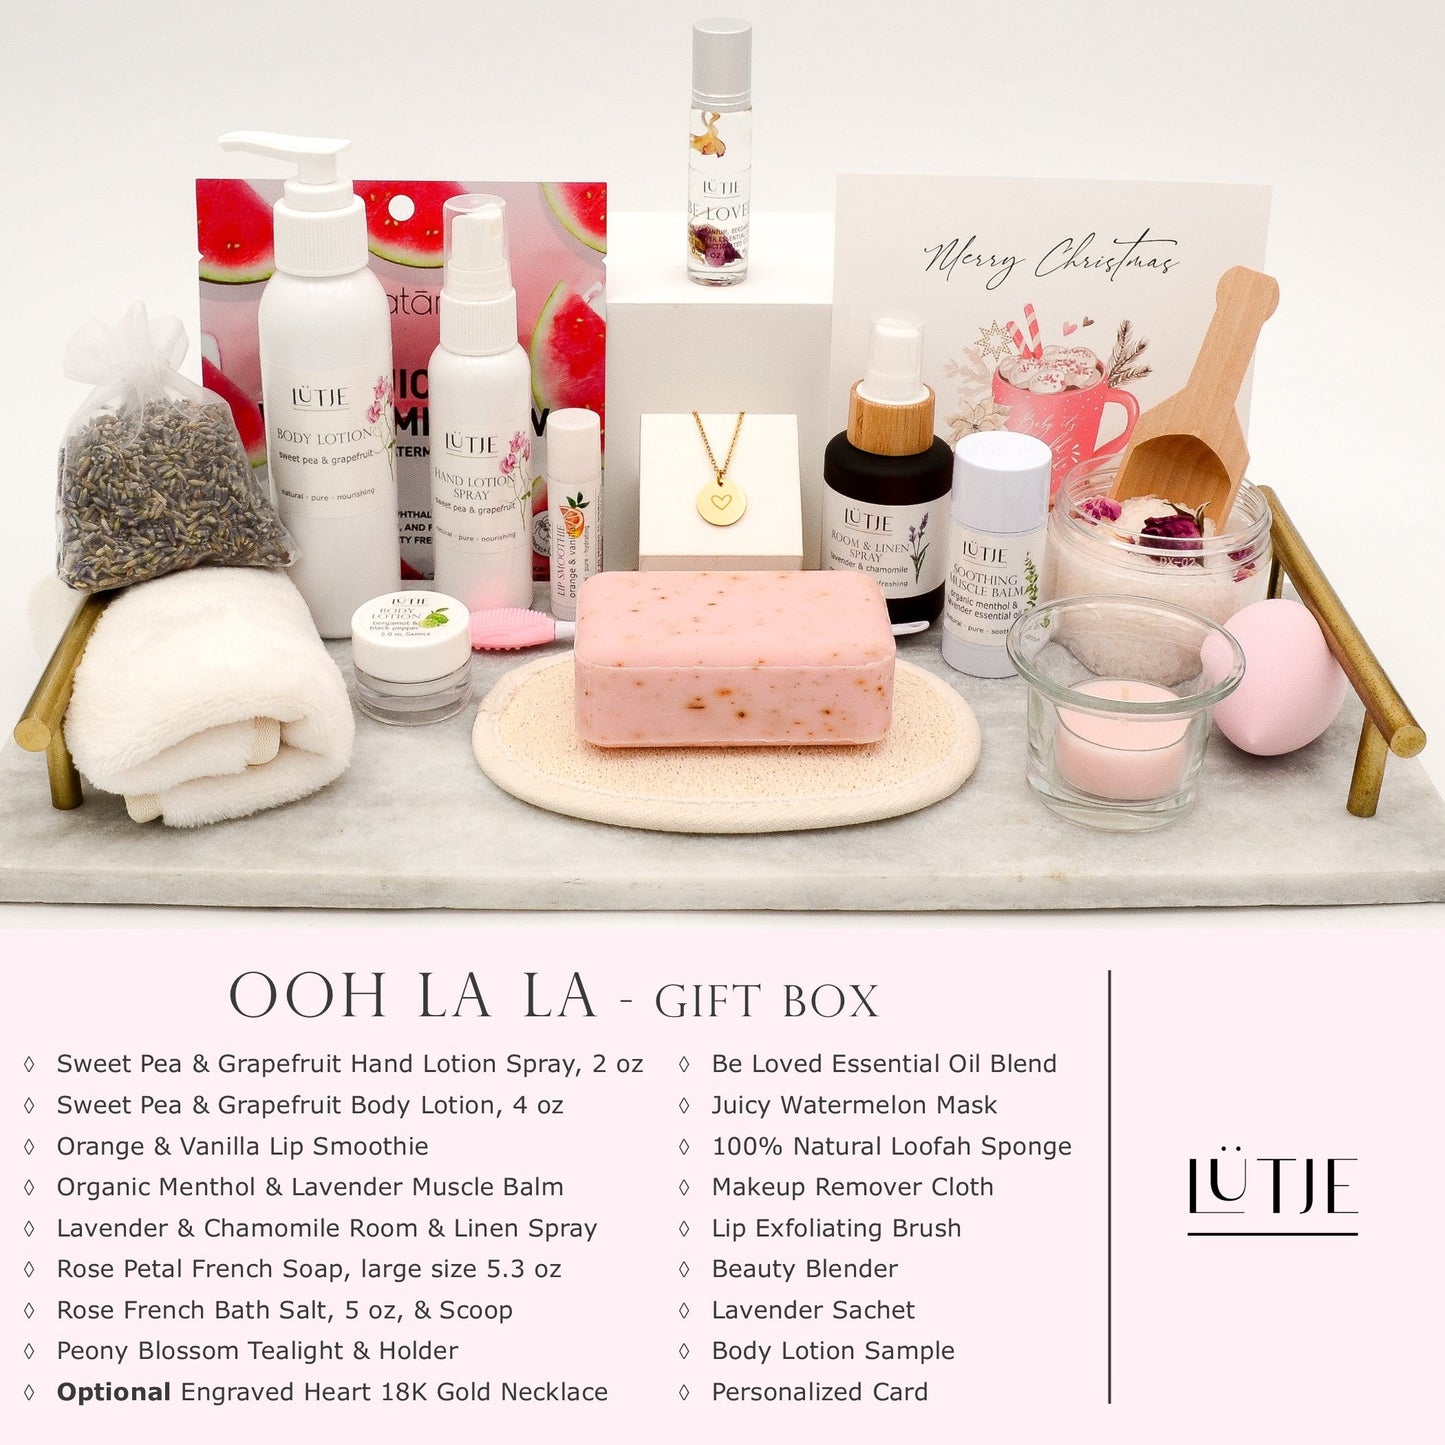 Ooh La La Gift Box for women, wife, daughter, BFF, sister, mom, or grandma, includes Sweet Pea & Grapefruit hand lotion spray and body lotion, essential oil, lip balm, soothing muscle balm, Lavender & Chamomile room & linen spray, French soap, French bath salts, hydrating face mask, other bath, spa and self-care items, and 18K gold-plated necklace with engraved heart.